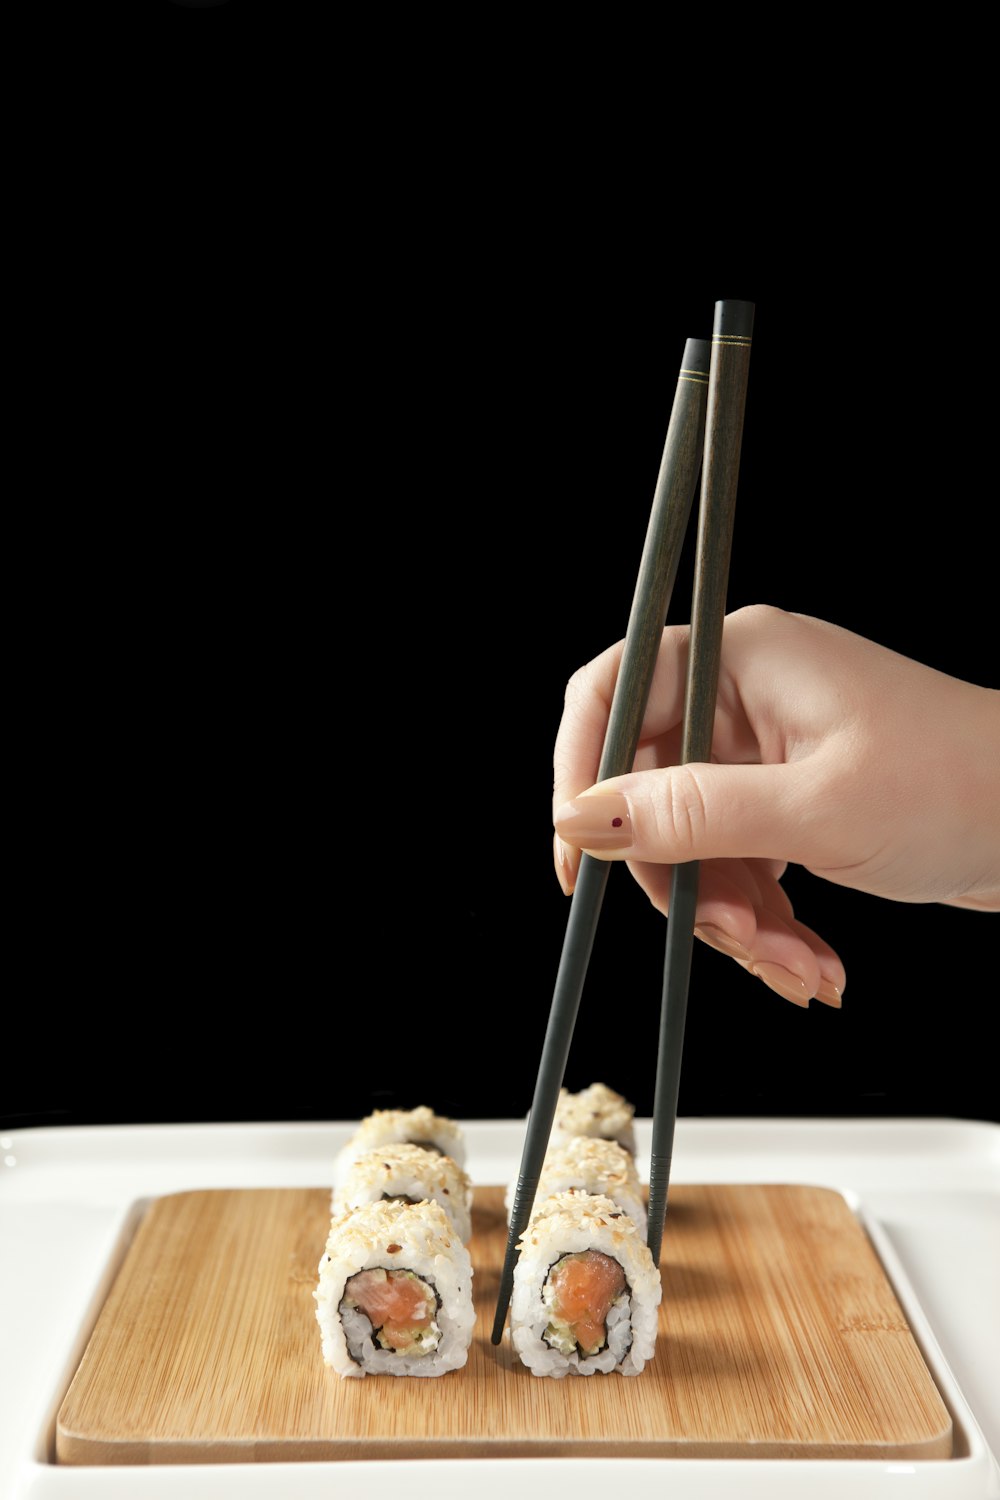 person holding chopsticks and bread